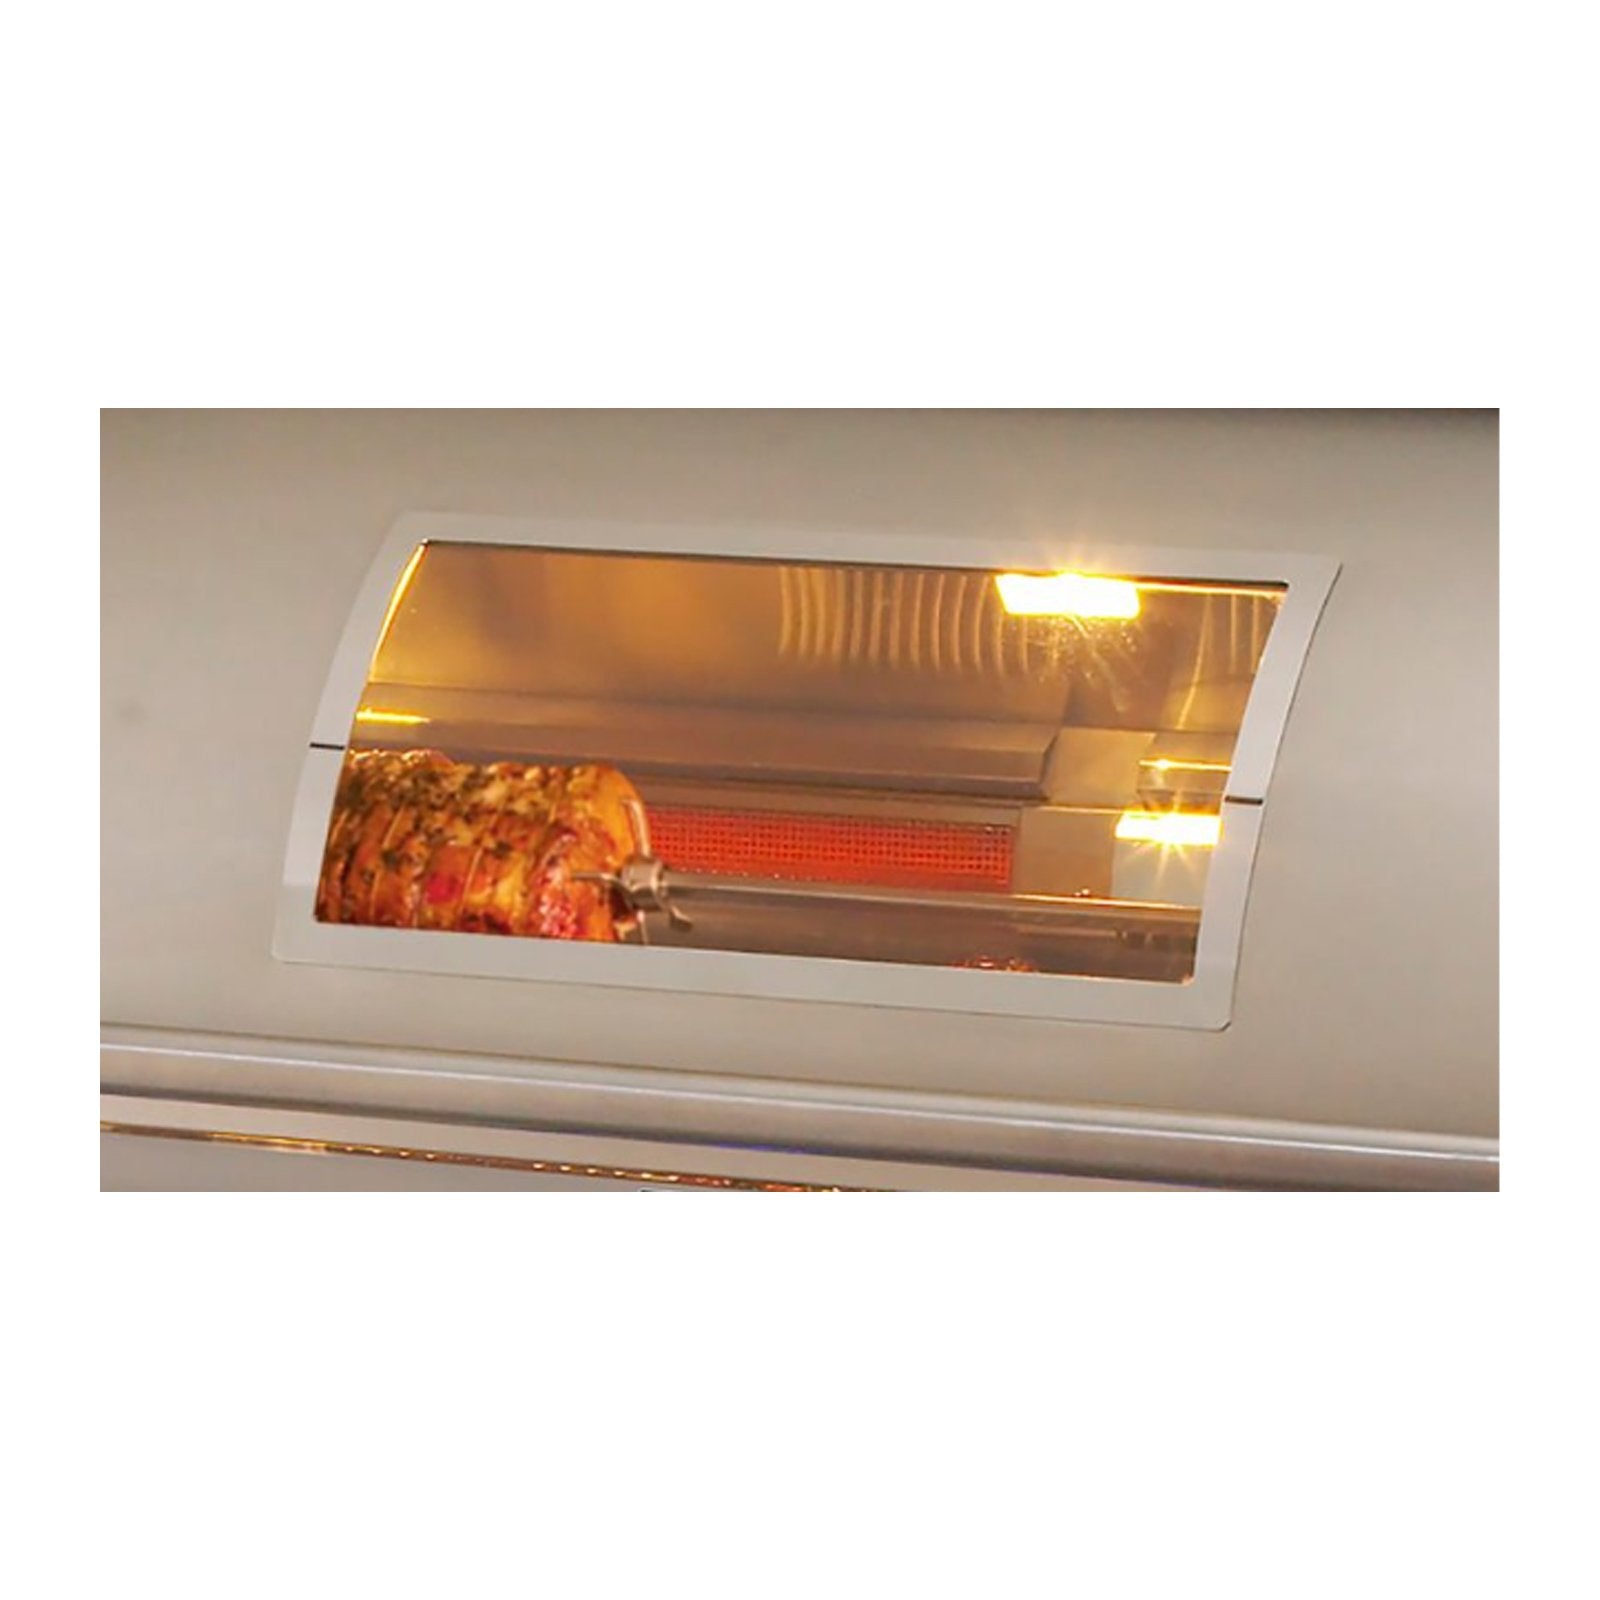 fire-magic-30-a660i-built-in-gas-grill-w-rotiss-analog-display 10